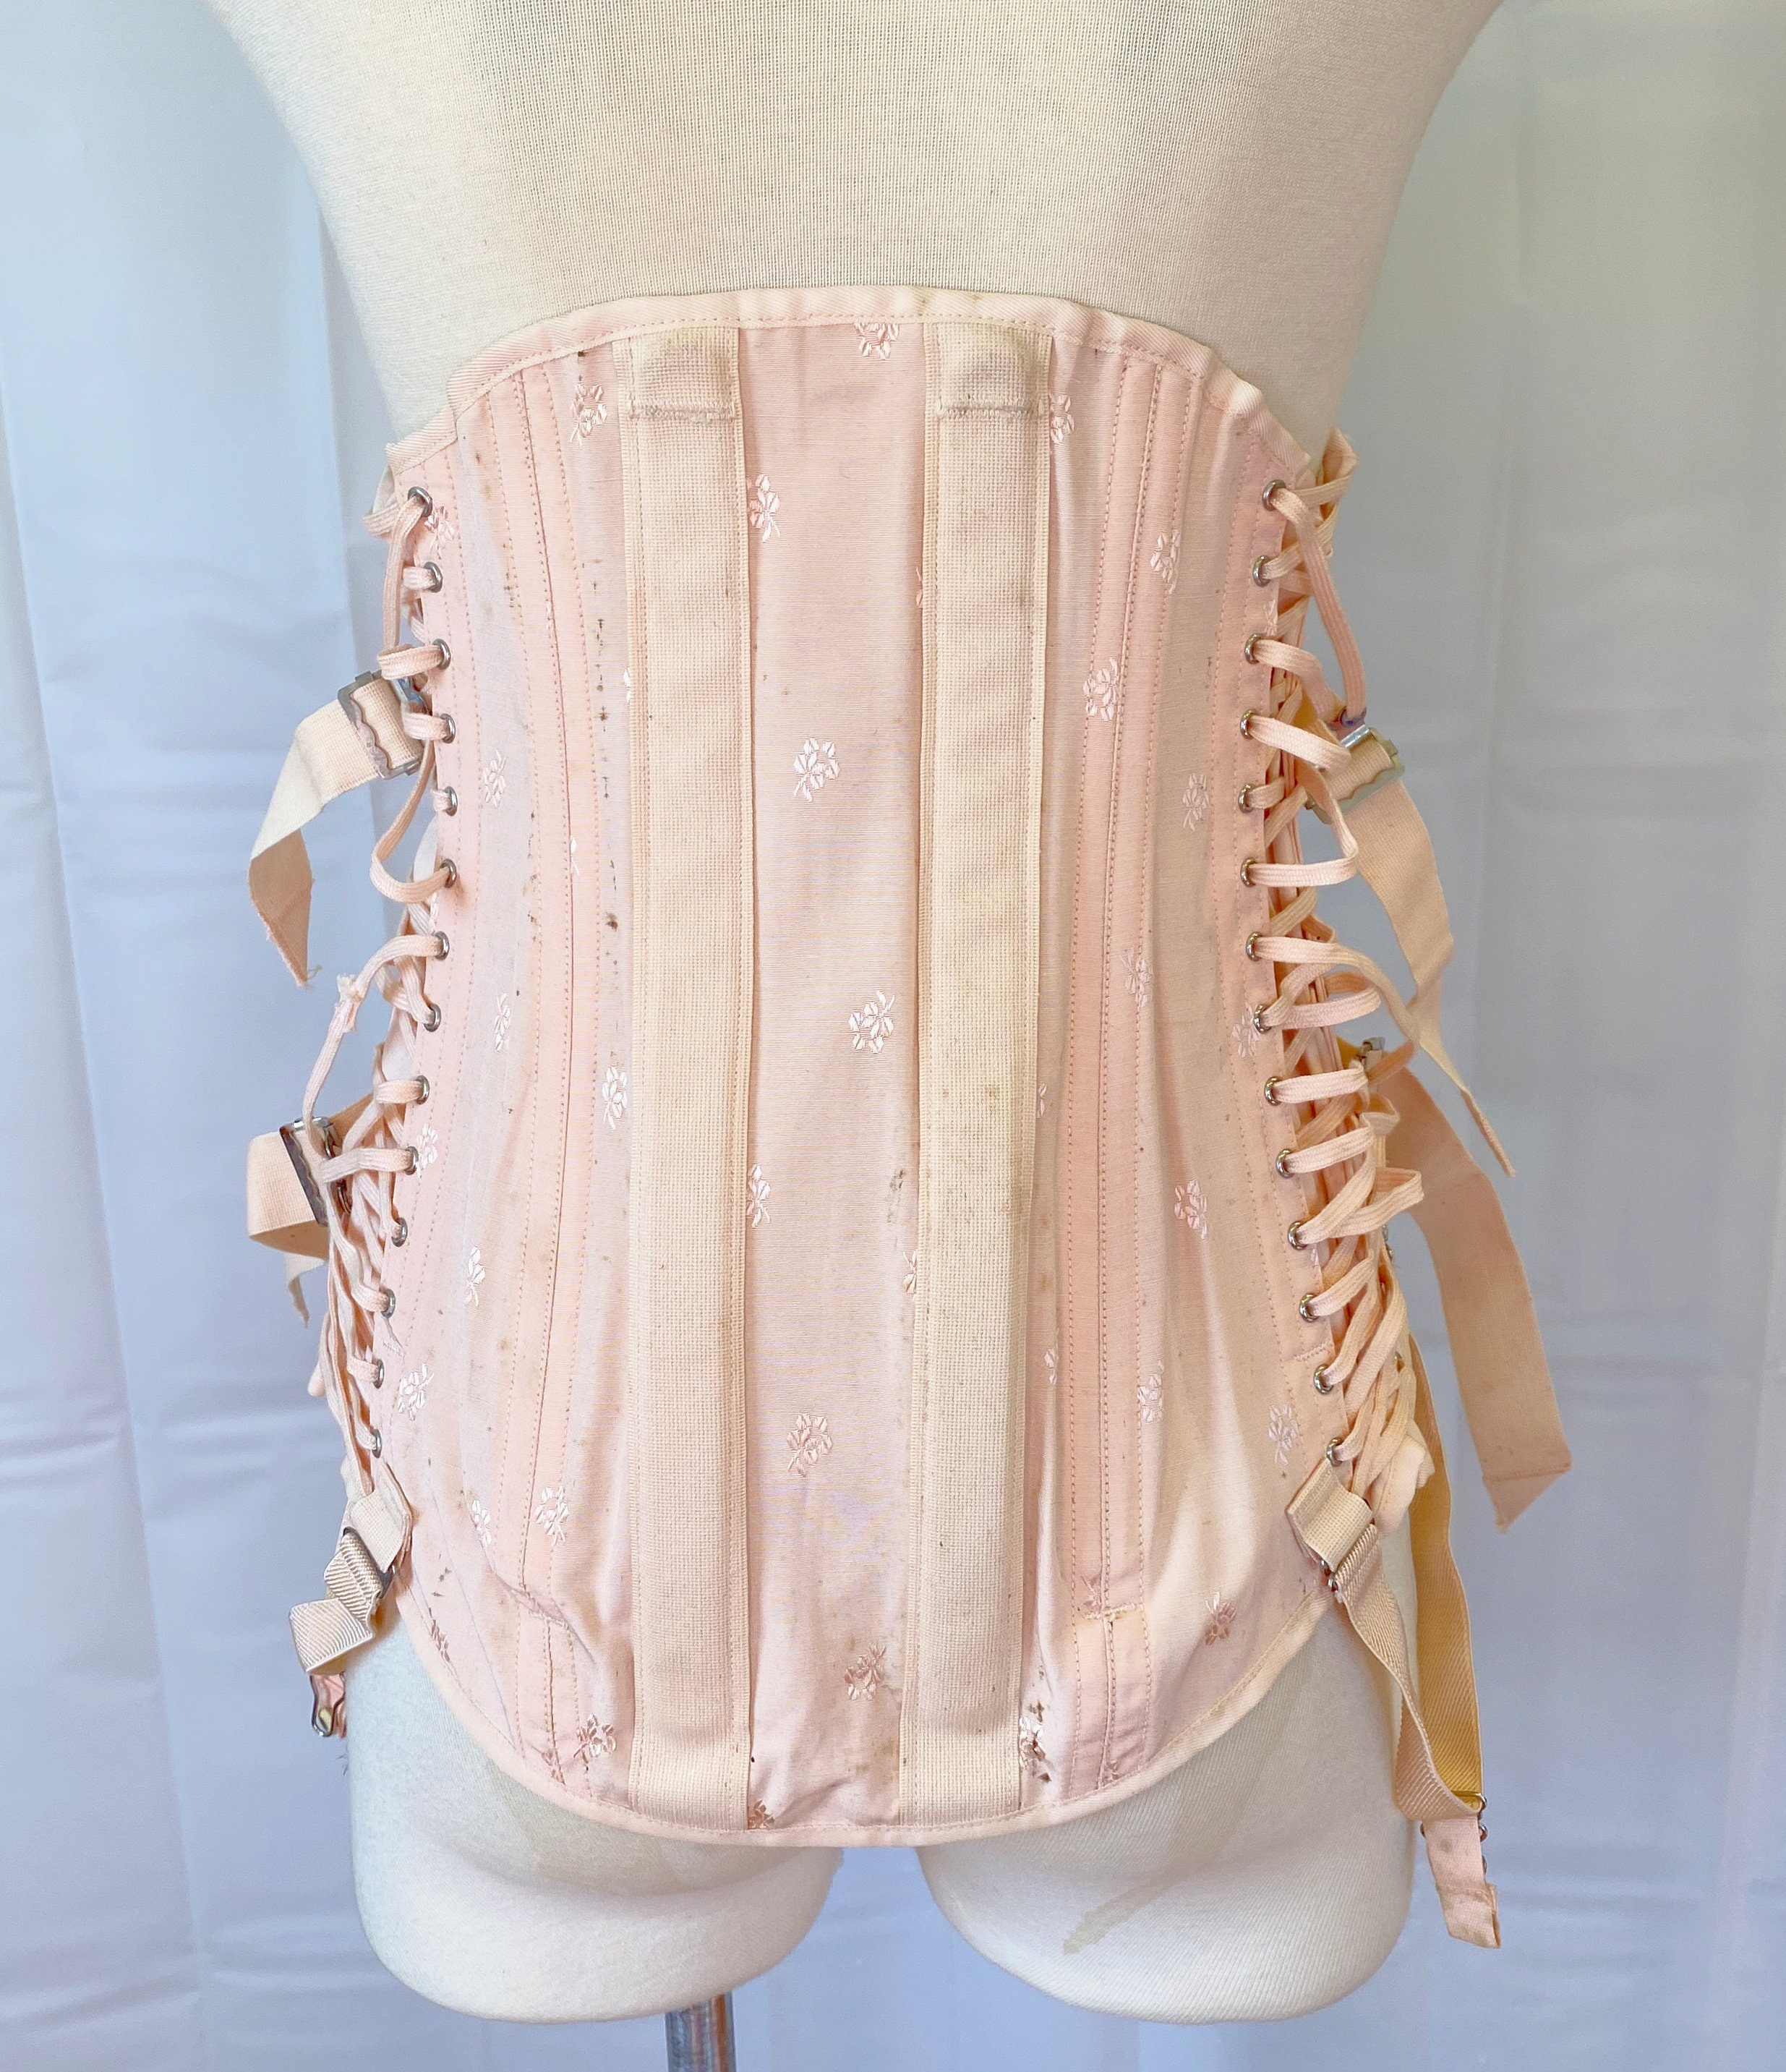 Vintage Boned Corset Girdle 1940s Waist Trainer With Garters Adjustable Fan  Laced Waist Cincher Small Medium Camp Style 